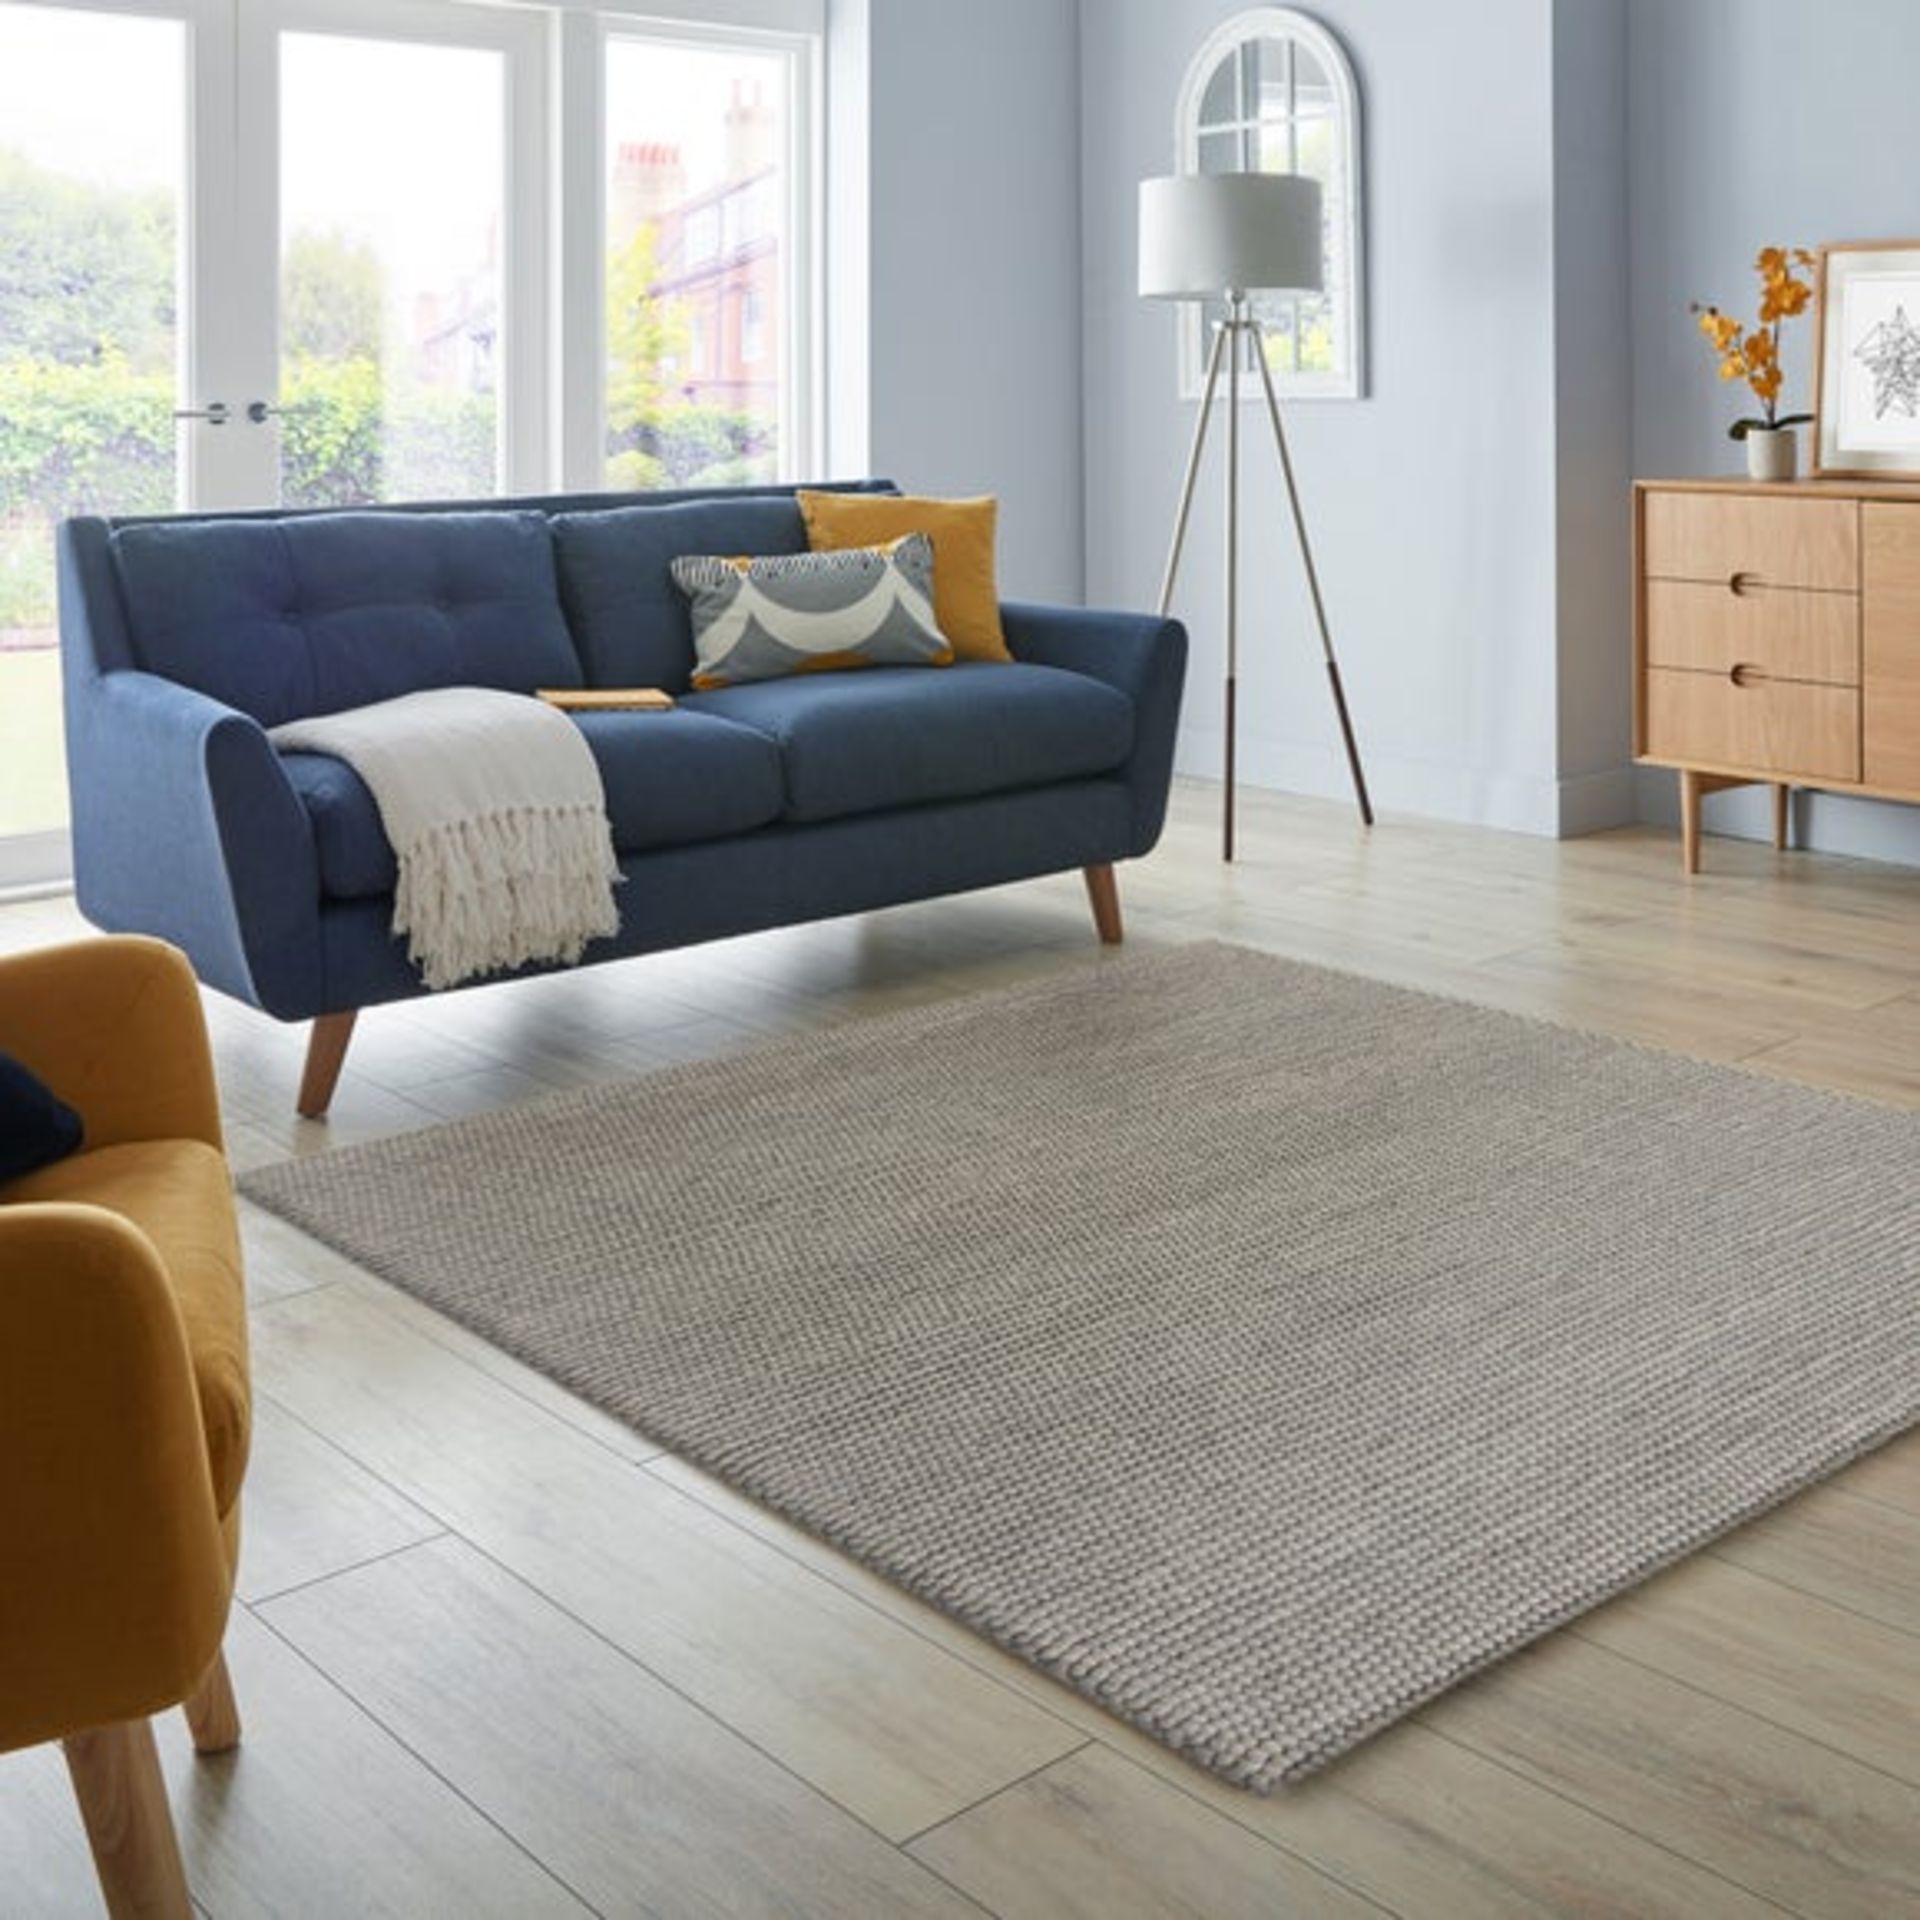 Pebble Grey 200X200cm Rug RRP 299 About the Product(s) Size: 200X200cm (6.5X6.5in)Colour: GreyShape: